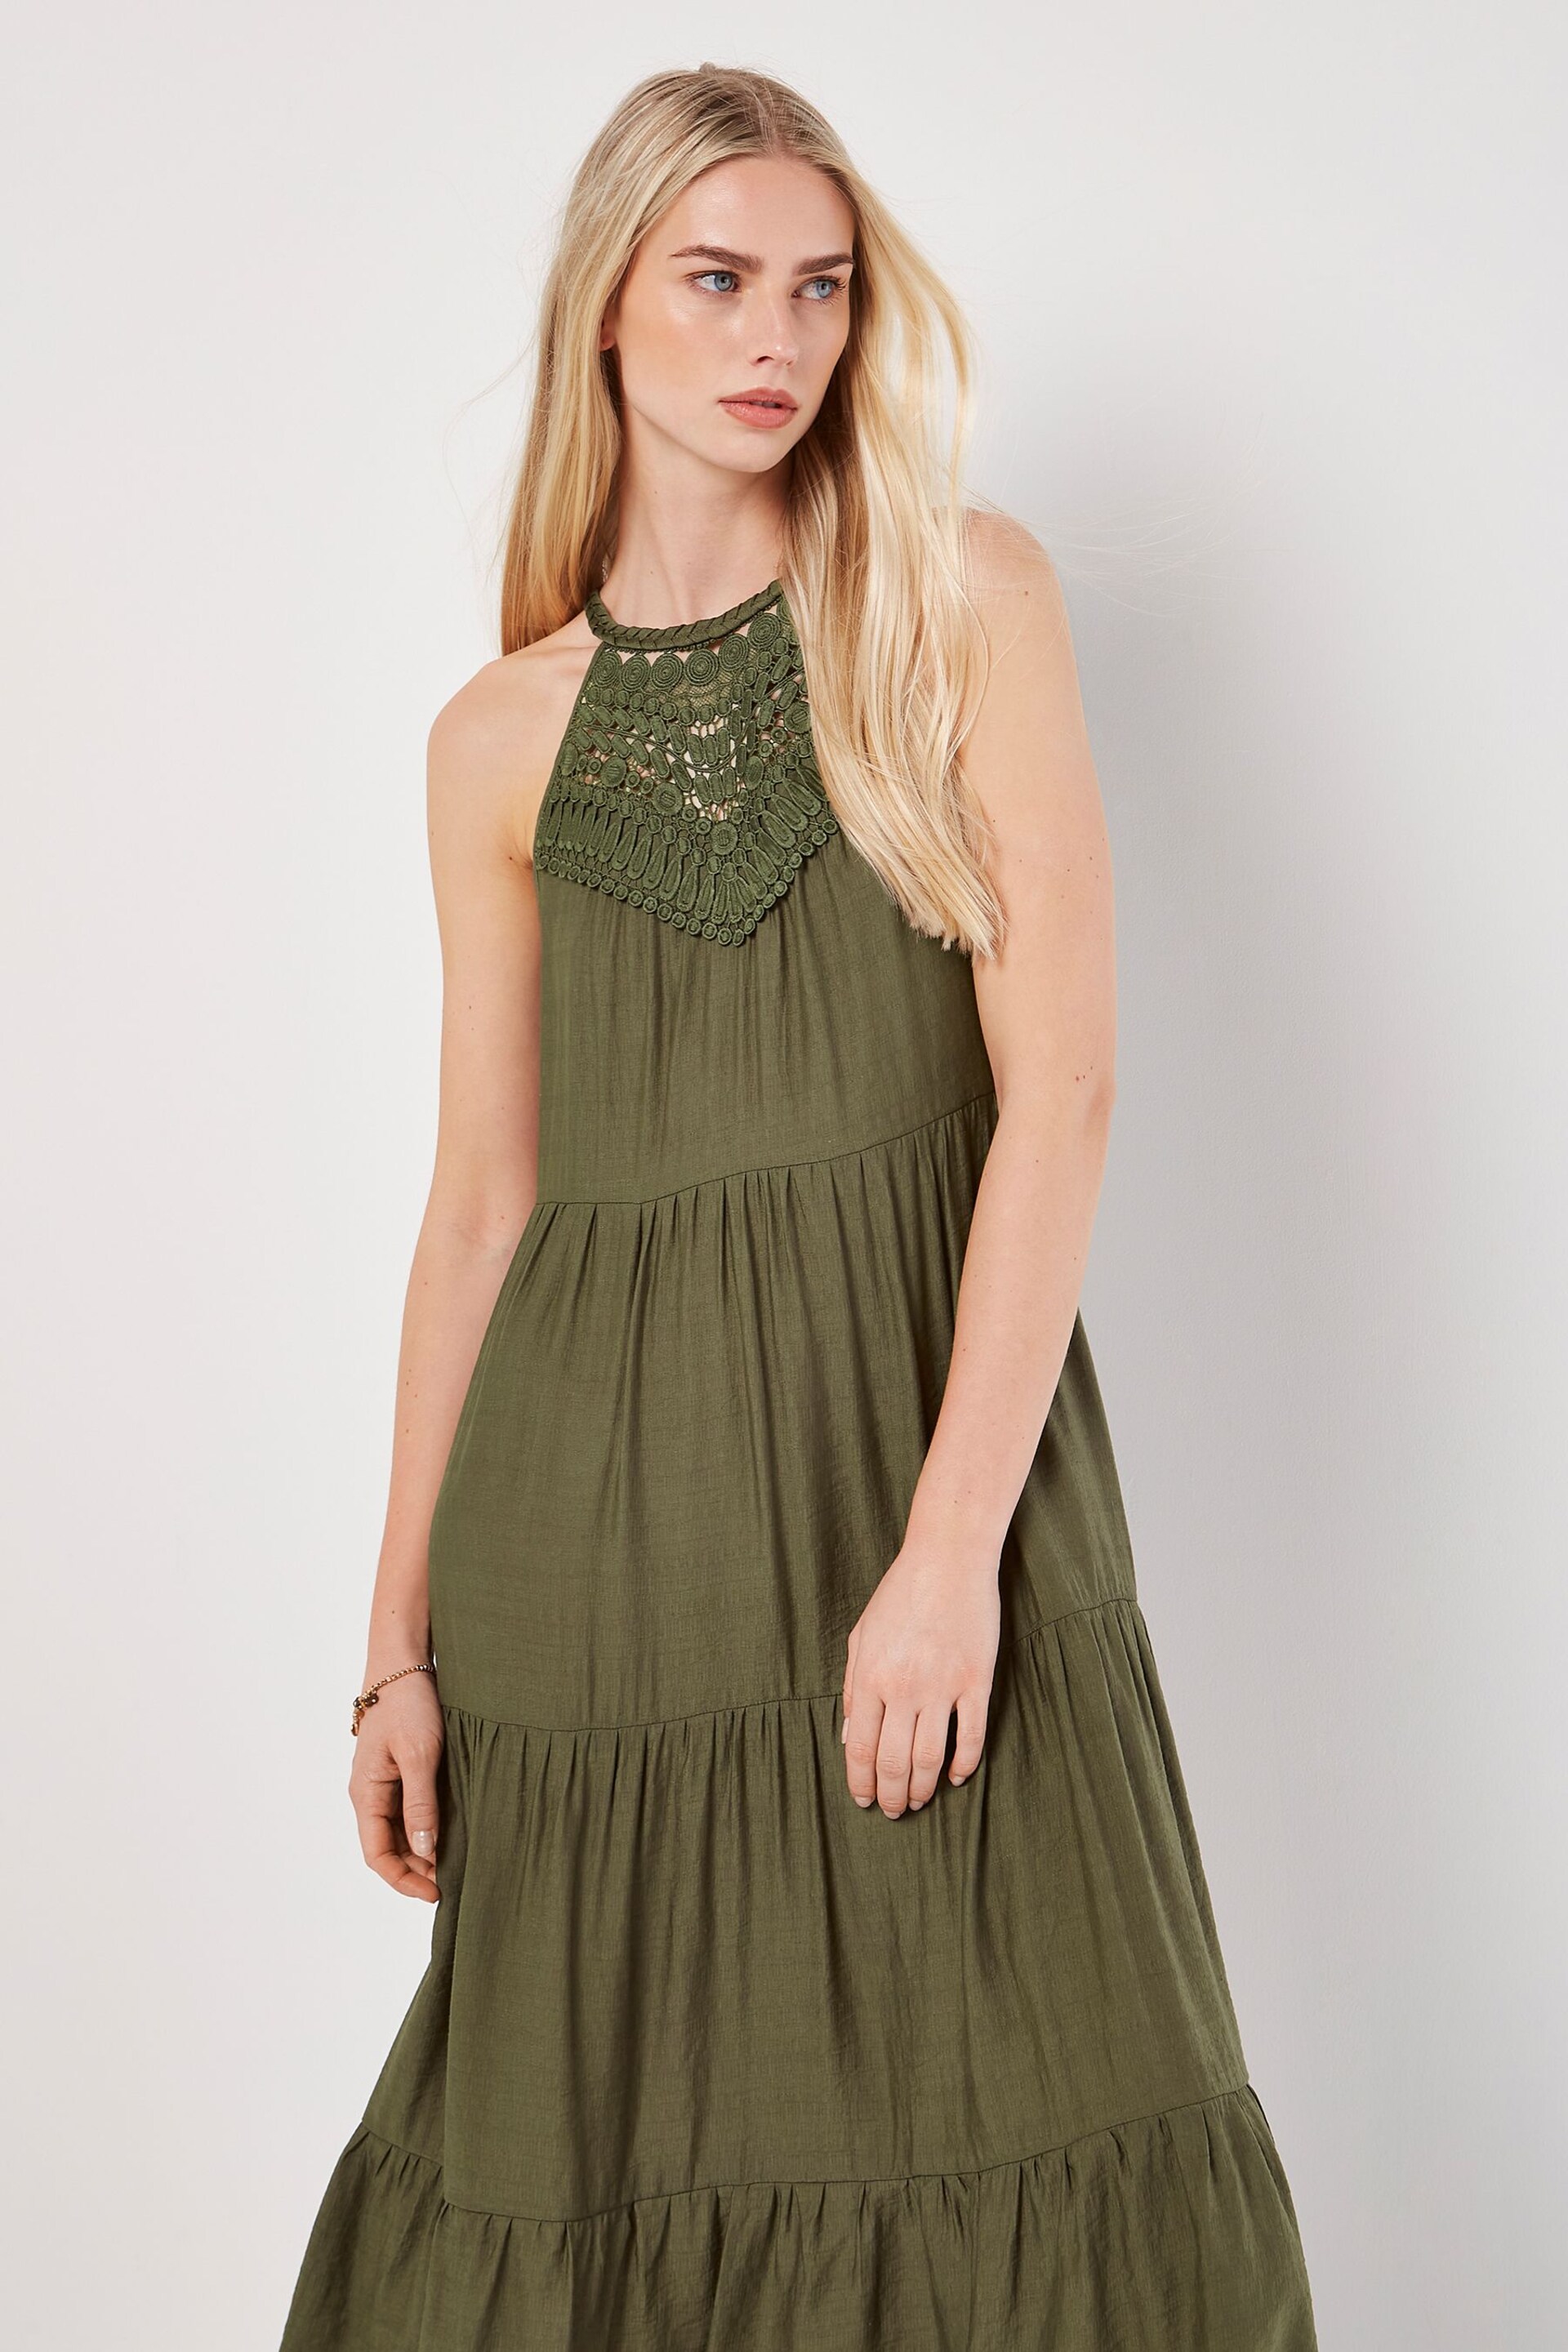 Apricot Green Lace Neck Shimmer Midi Dress - Image 2 of 5